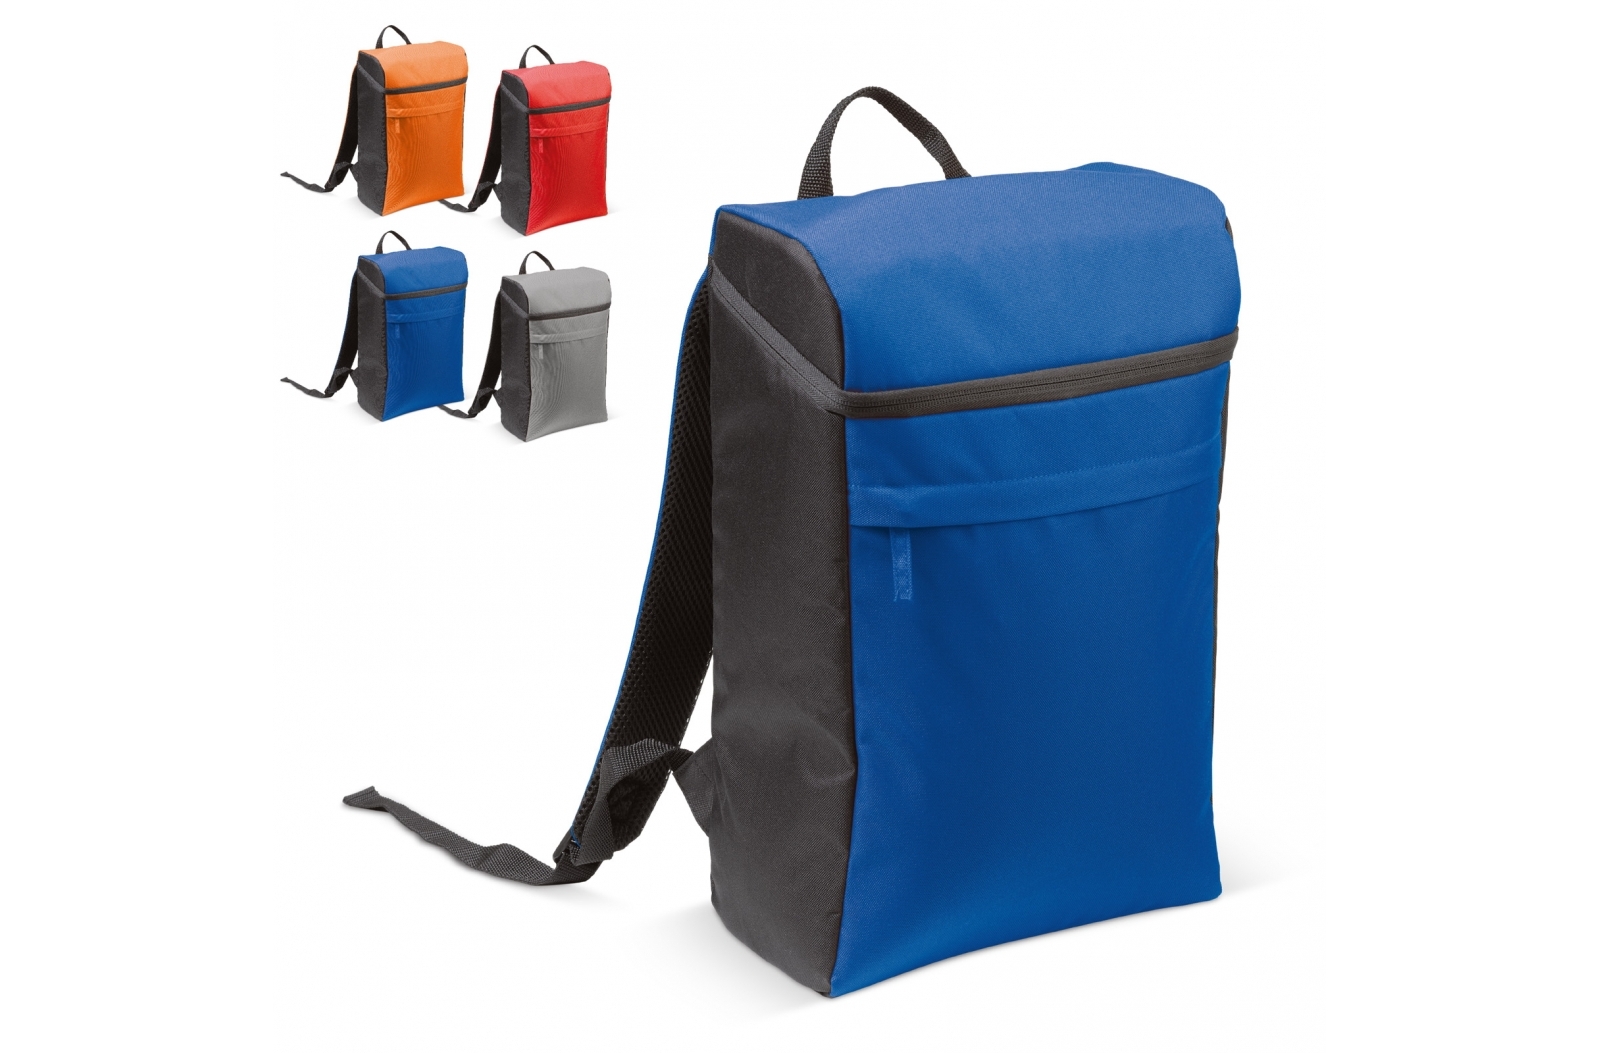 A roomy and comfortable backpack with a built-in cooler - Zelah